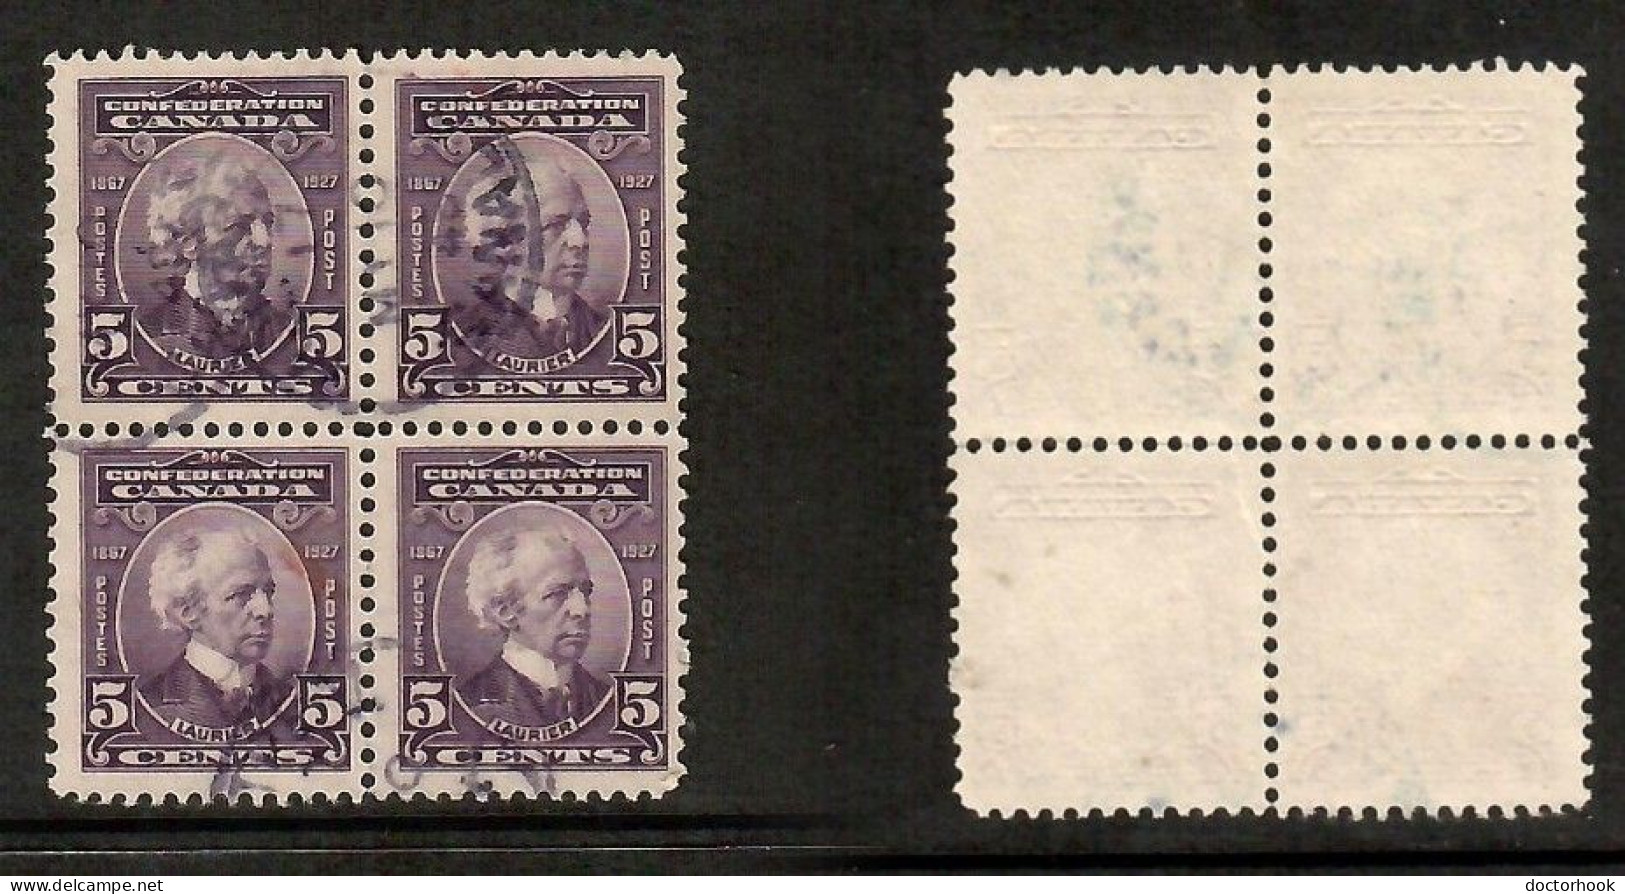 CANADA   Scott # 144 USED BLOCK Of 4 (CONDITION AS PER SCAN) (CAN-207) - Hojas Bloque